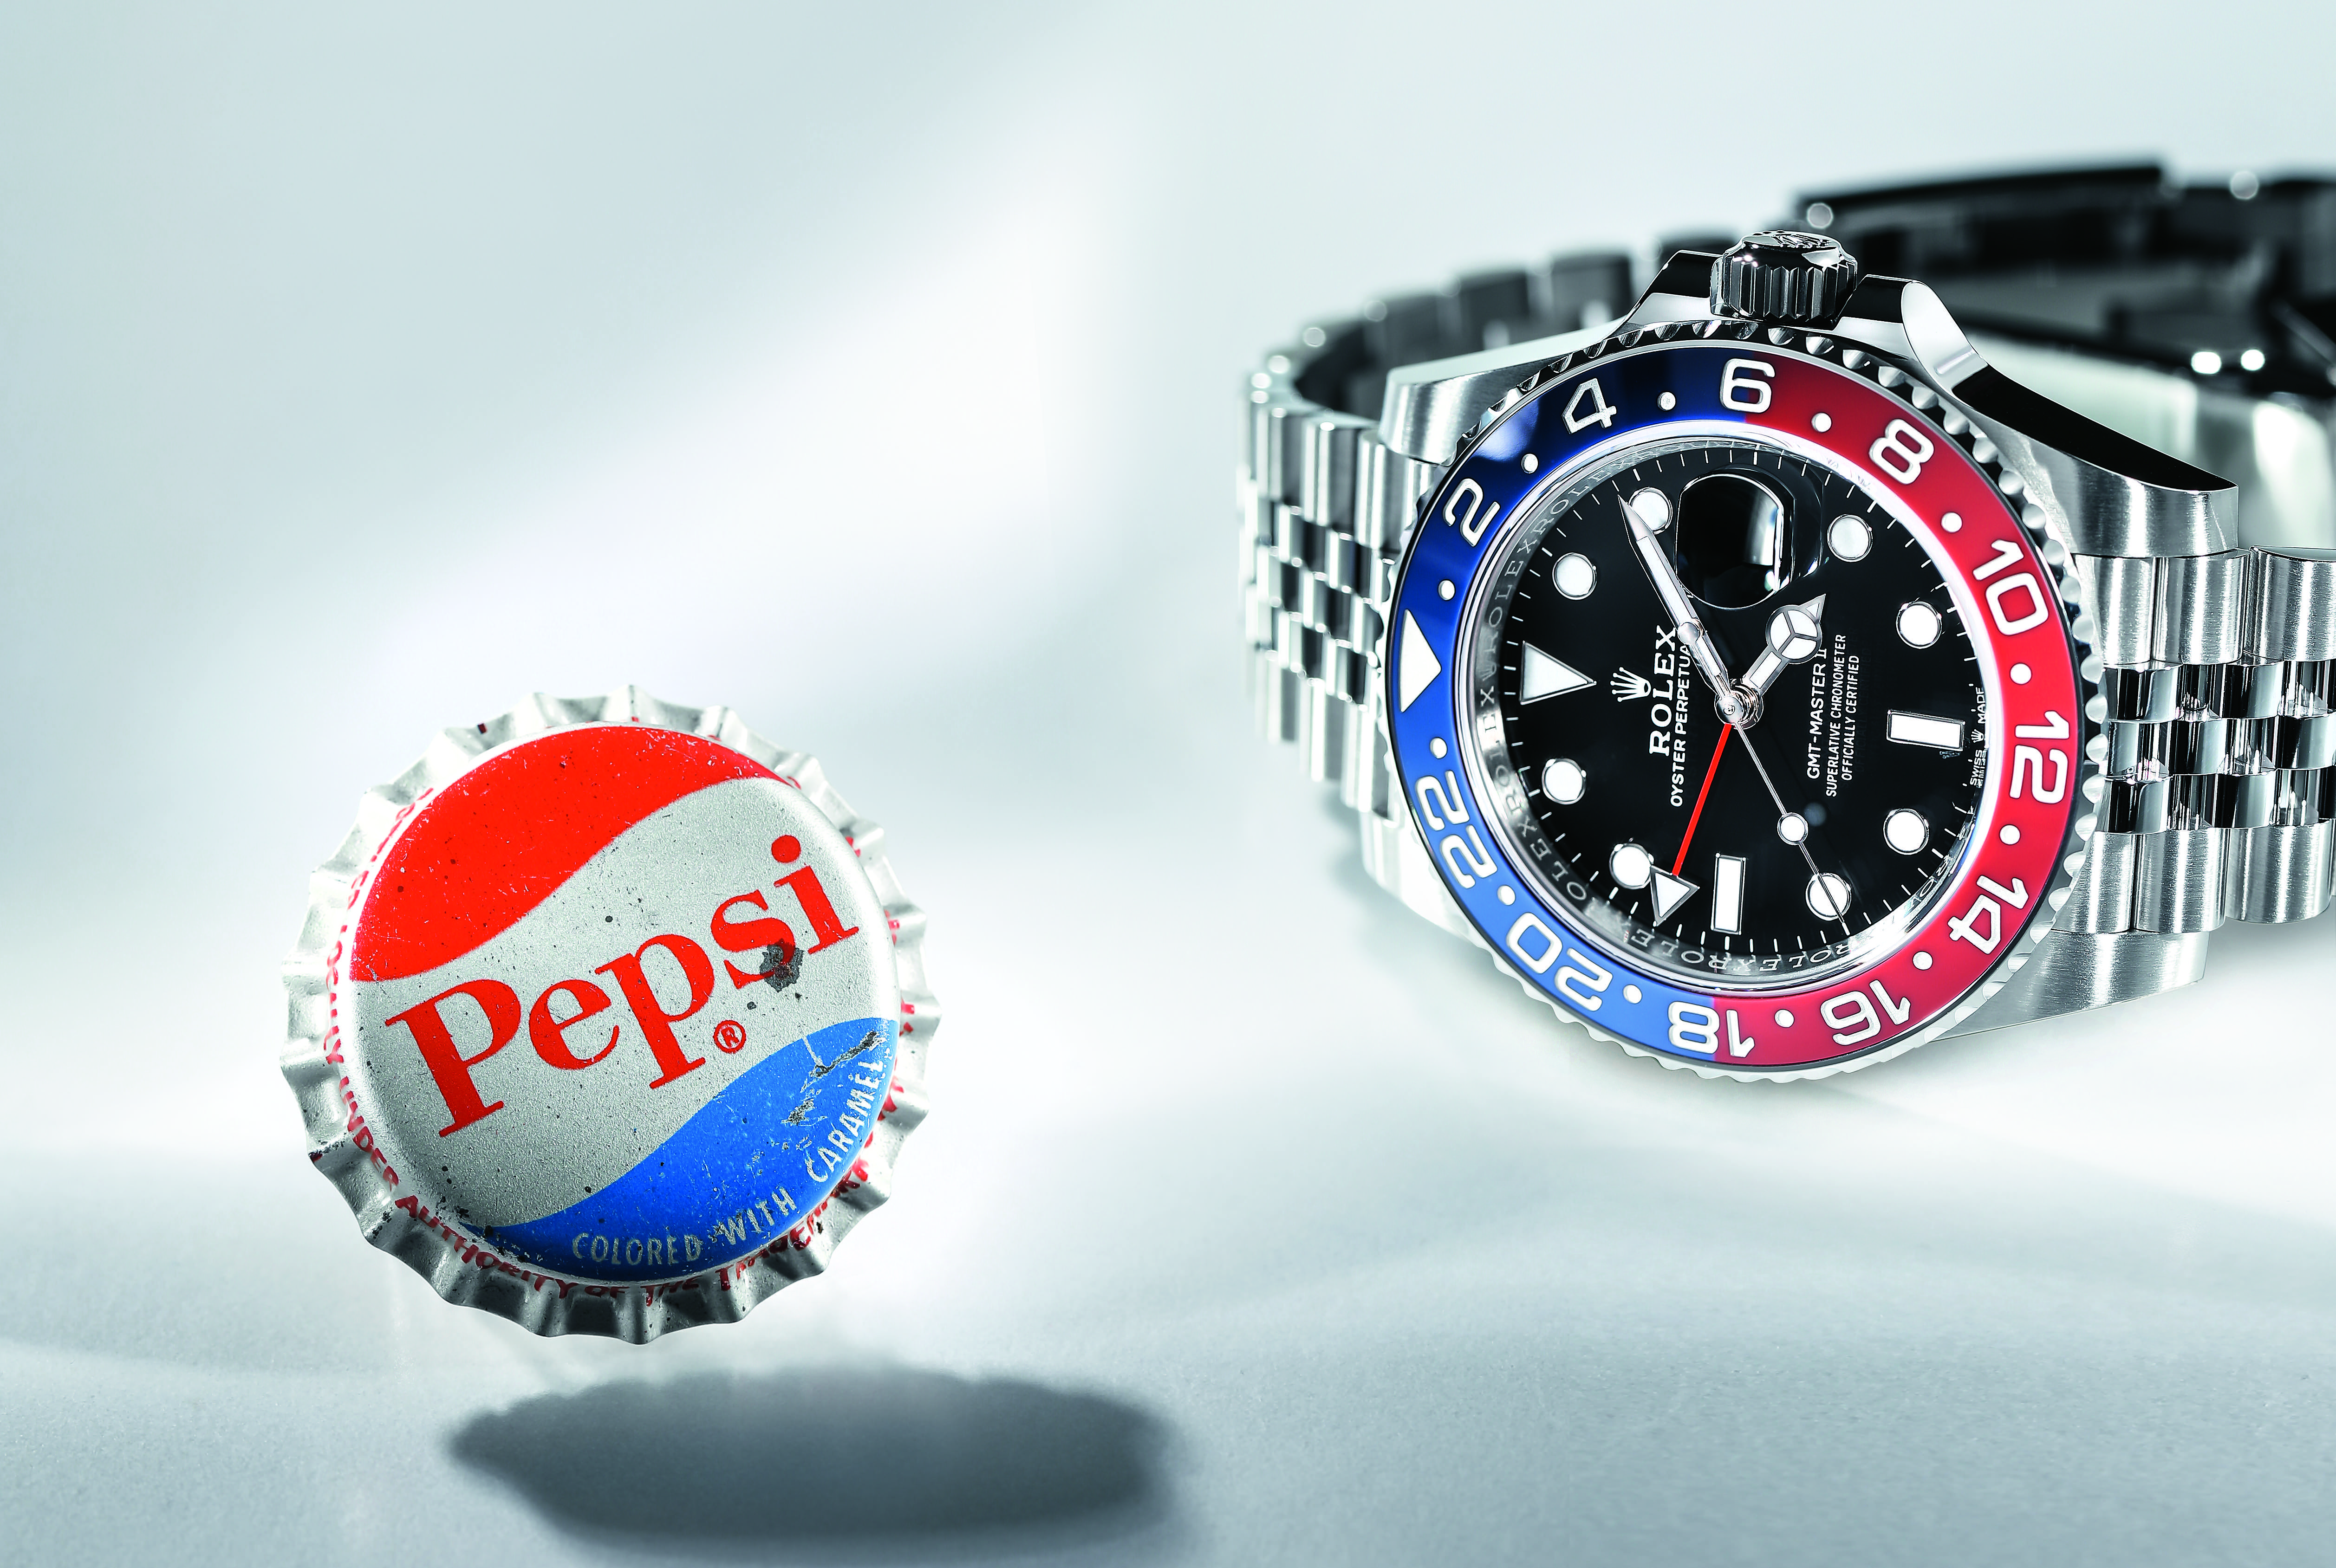 Watch This BEFORE You Buy A Pepsi Watch! - YouTube